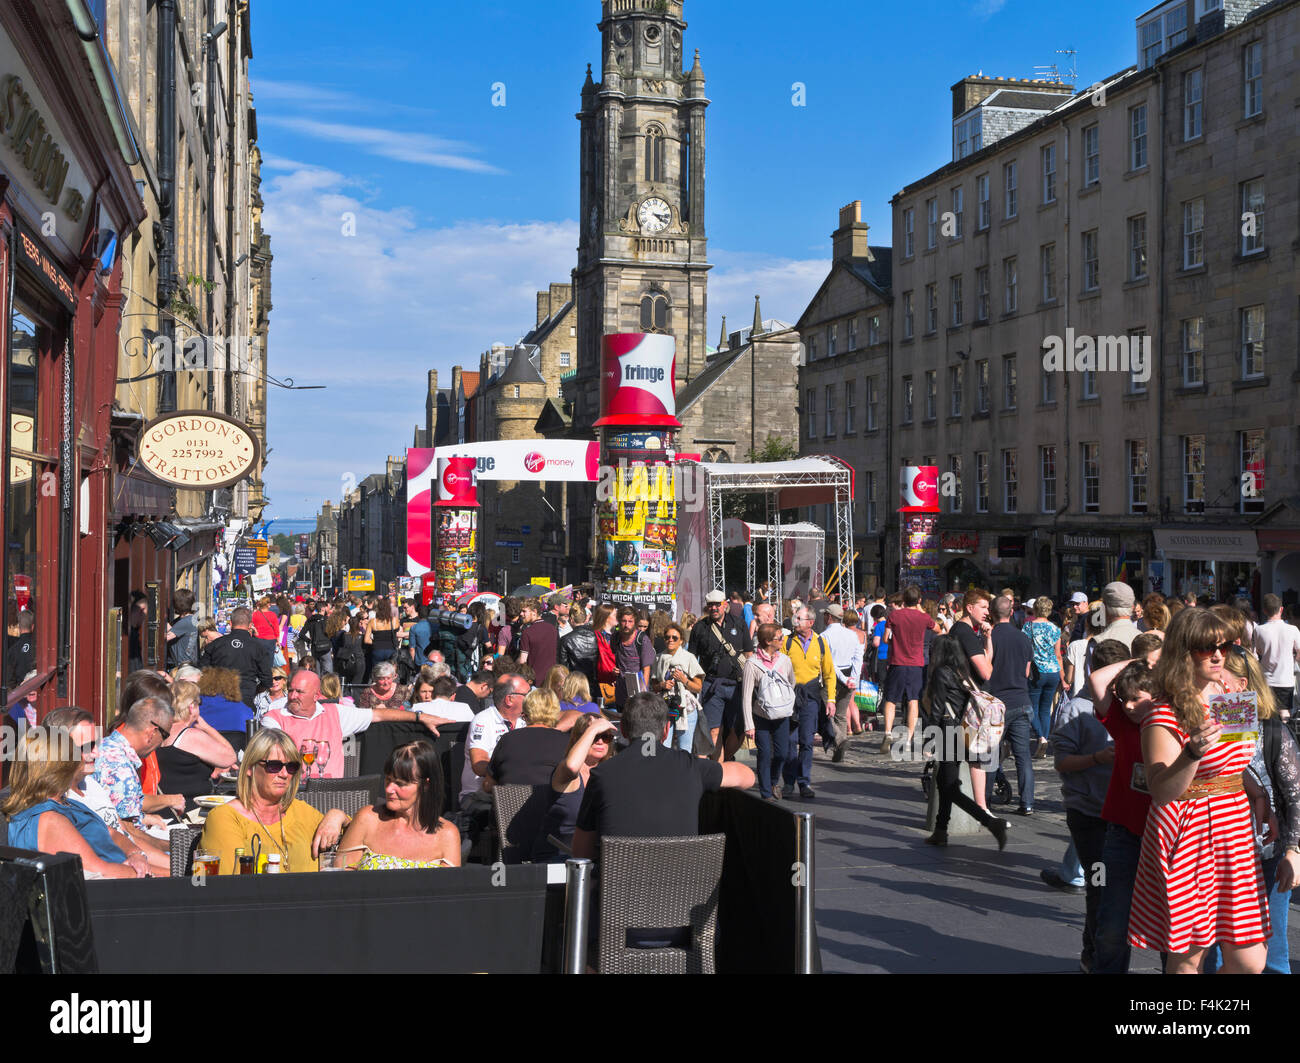 dh Fringe Festival ROYAL MILE EDINBURGH Tourist people sitting outdoor pub summer sun the bars city crowds street scotland cafe busy attraction Stock Photo